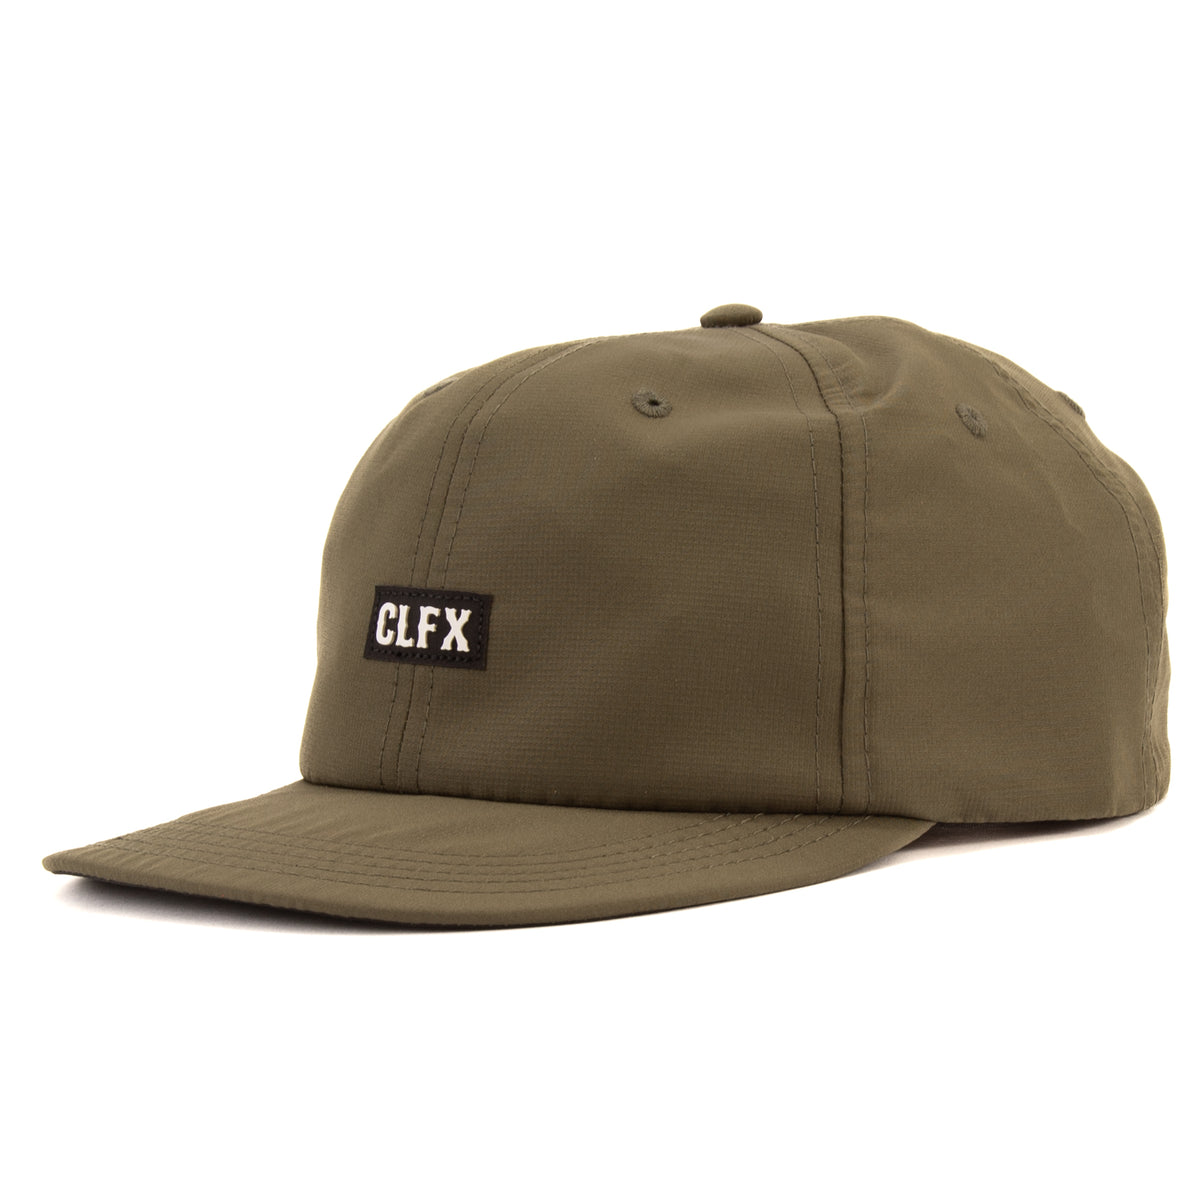 303 Boards - CLFX Collapsable Hat (Olive) – 303boards.com